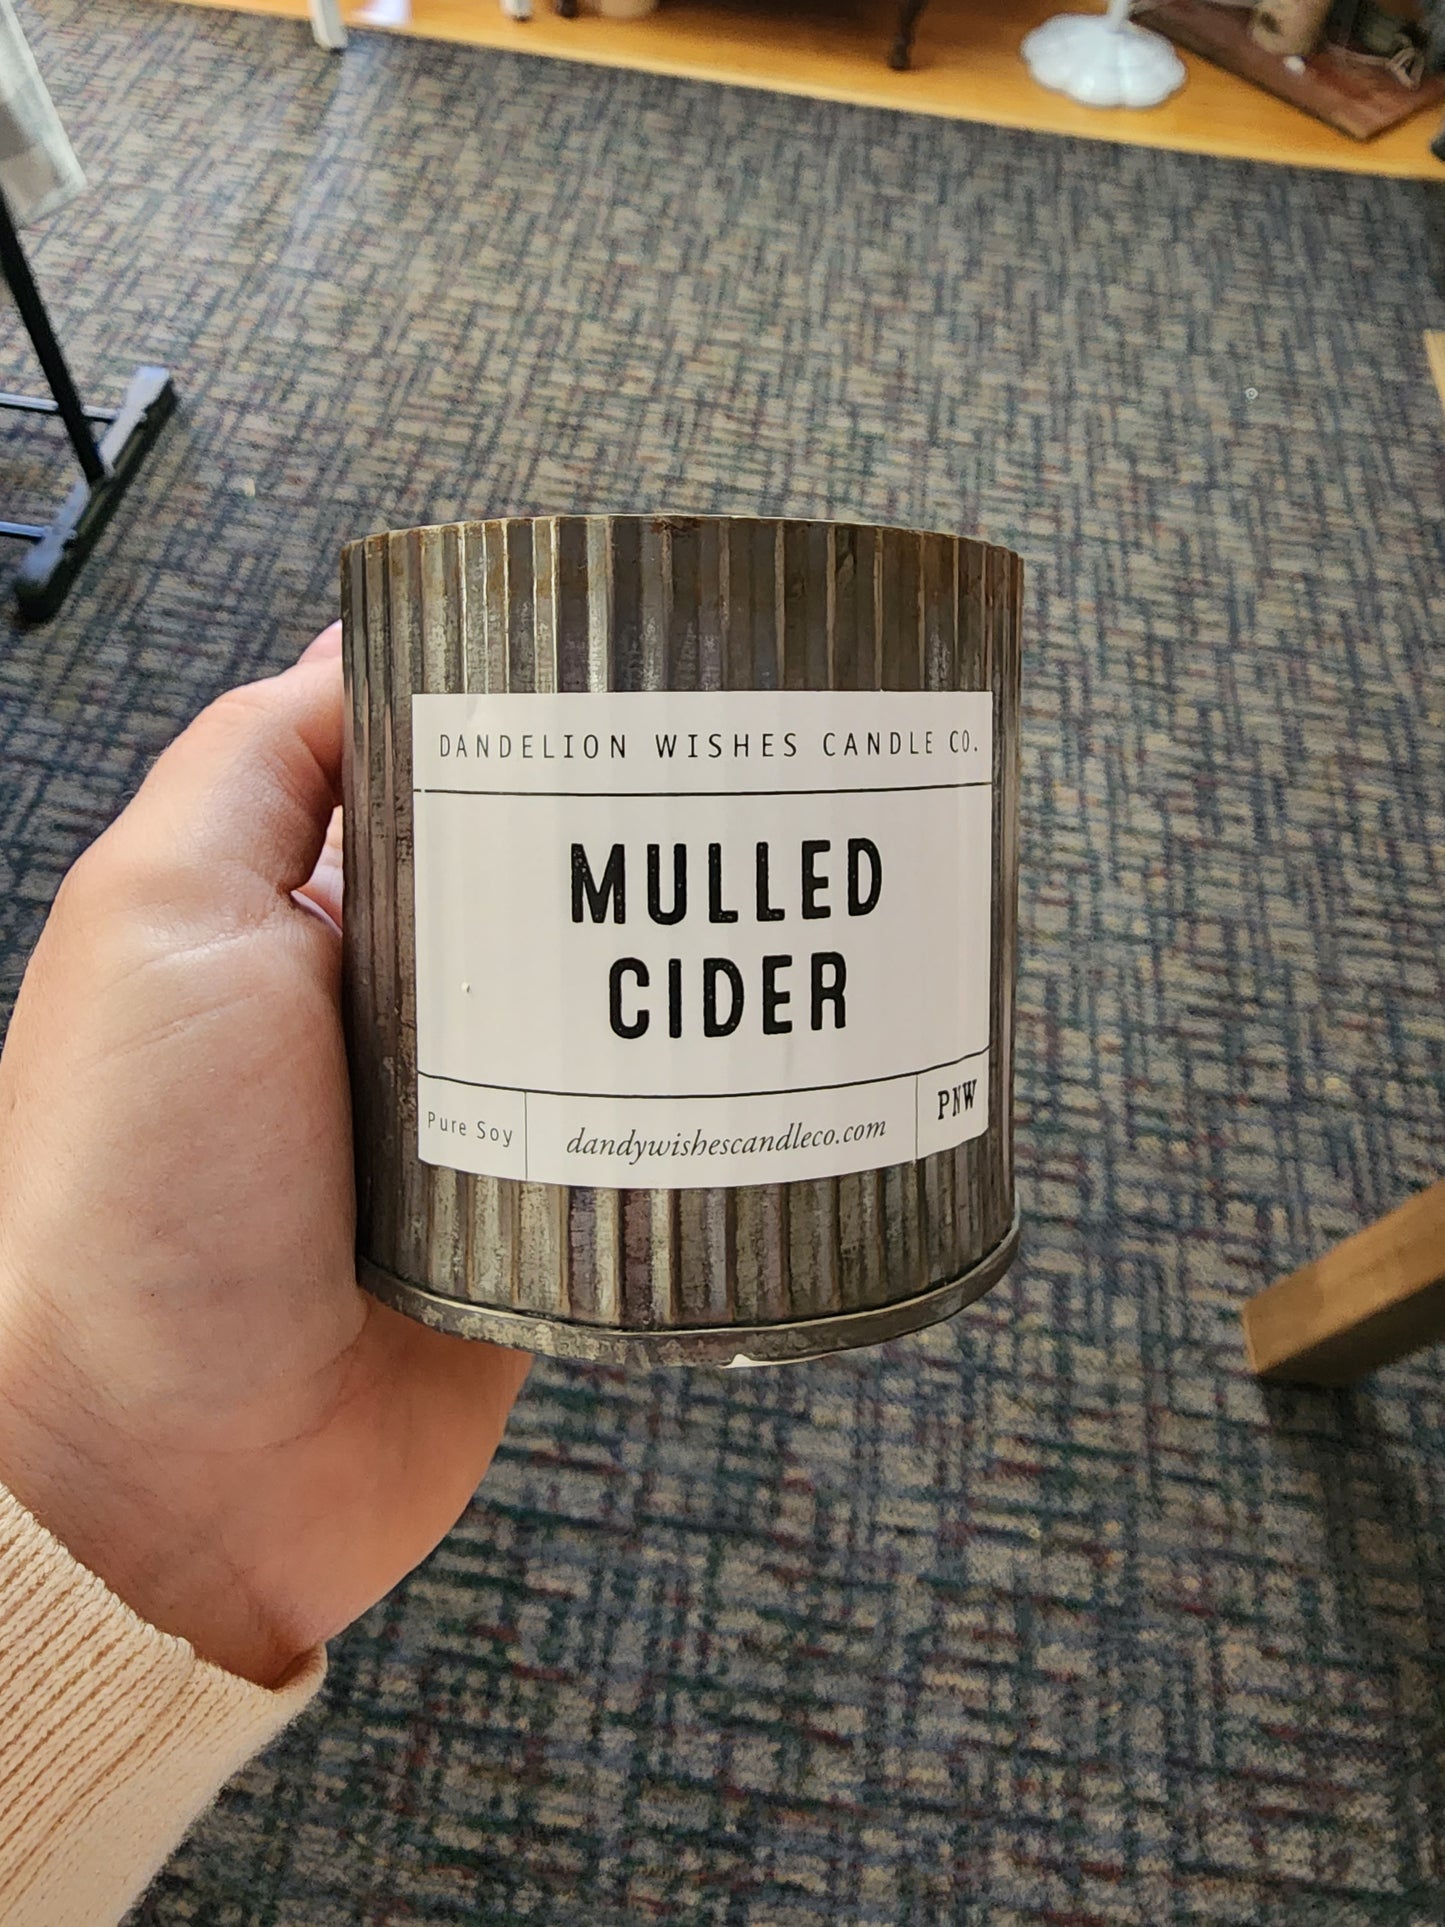 Mulled Cider 12 oz. Rustic Galvanized Tin Candle